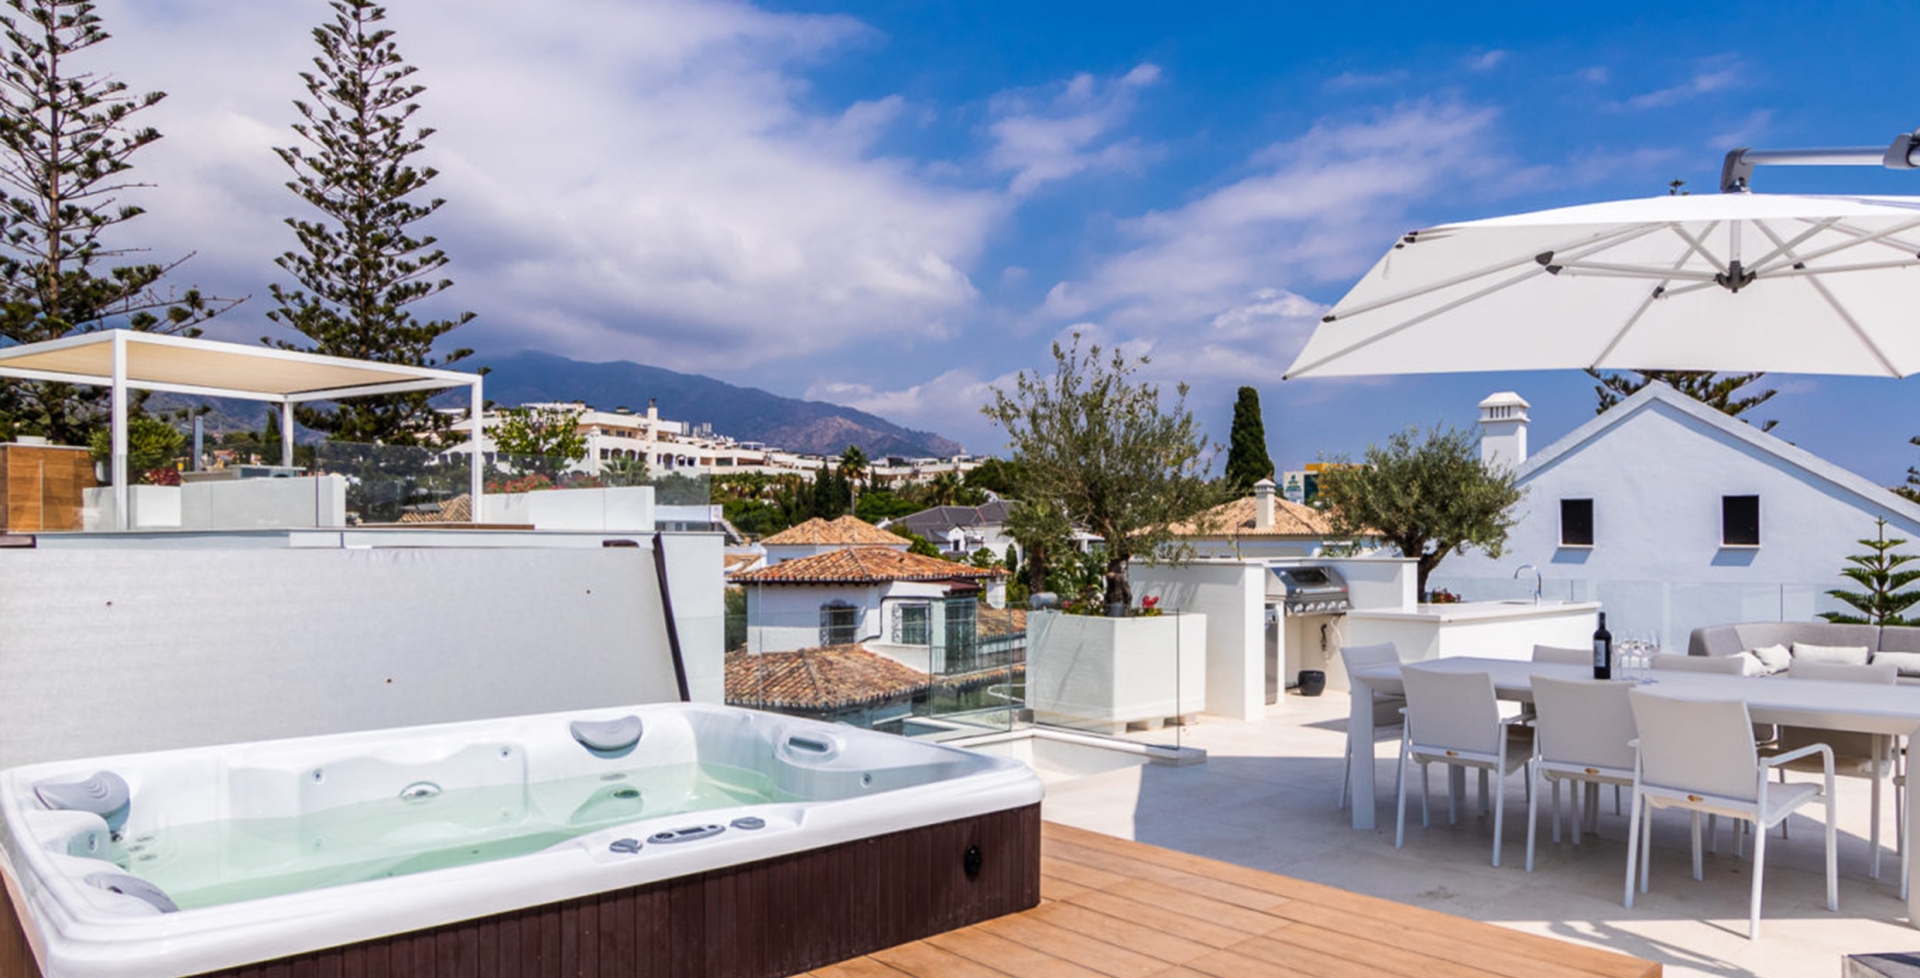 Villa G Marbella rooftop jacuzzi and dining